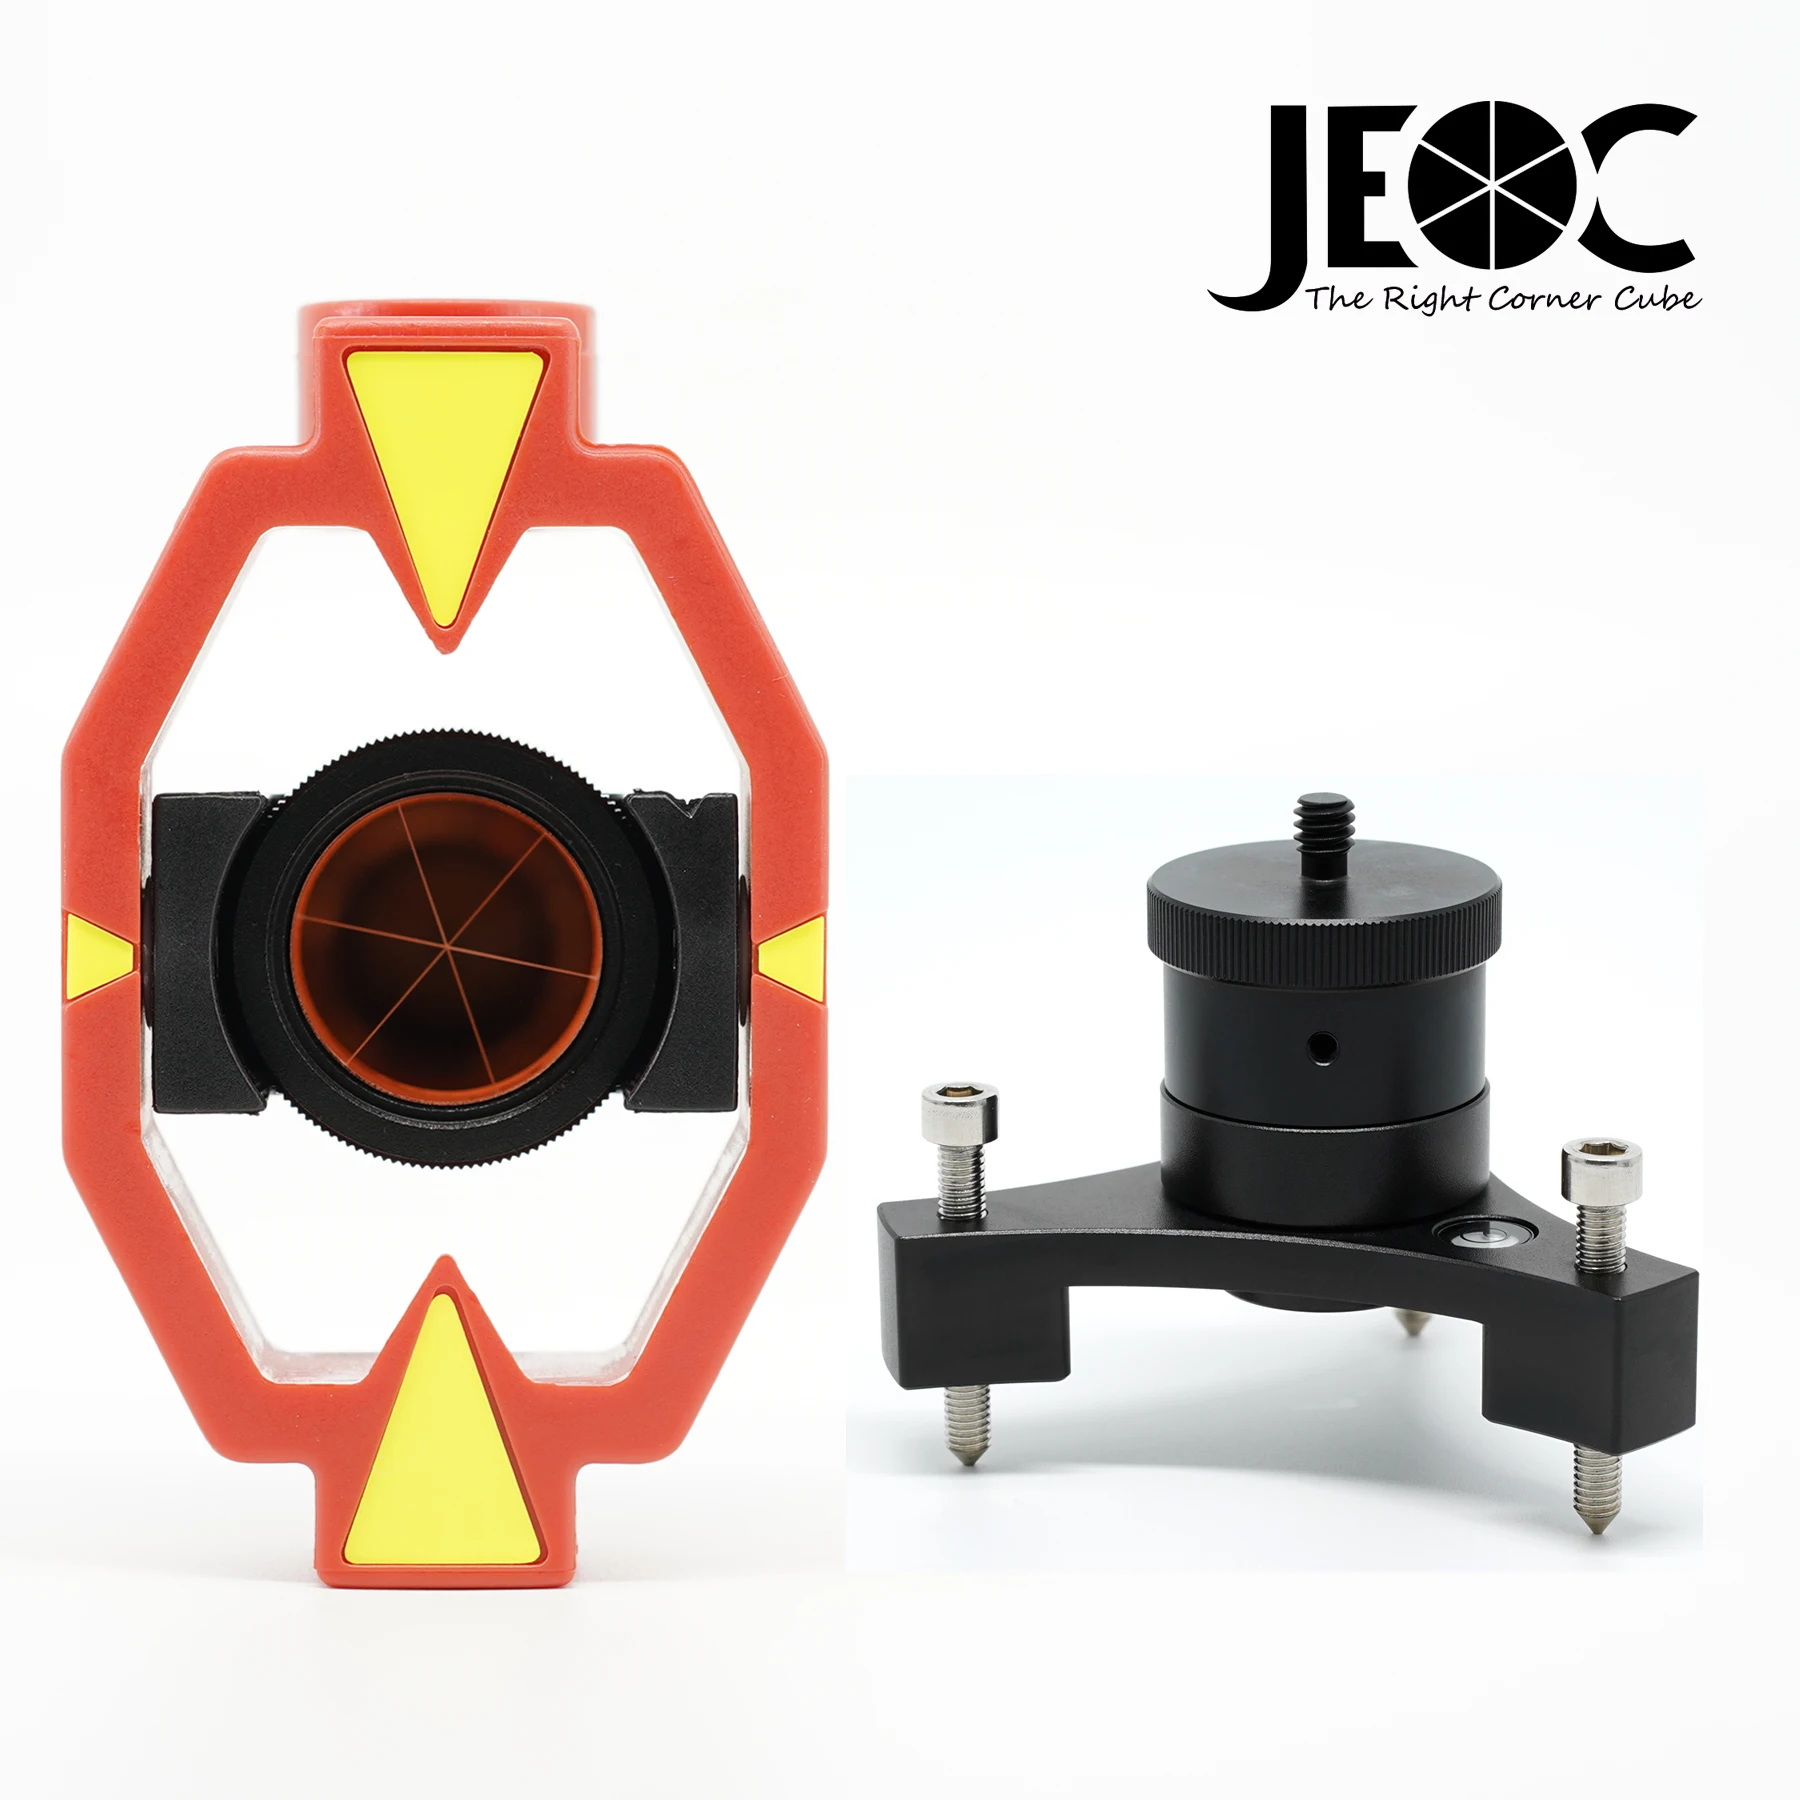 

JEOC Mini Prism GMP111-0 & Tribrach Set, Surveying Reflector For Leica Total Station, Land Surveying Equipment Accessories